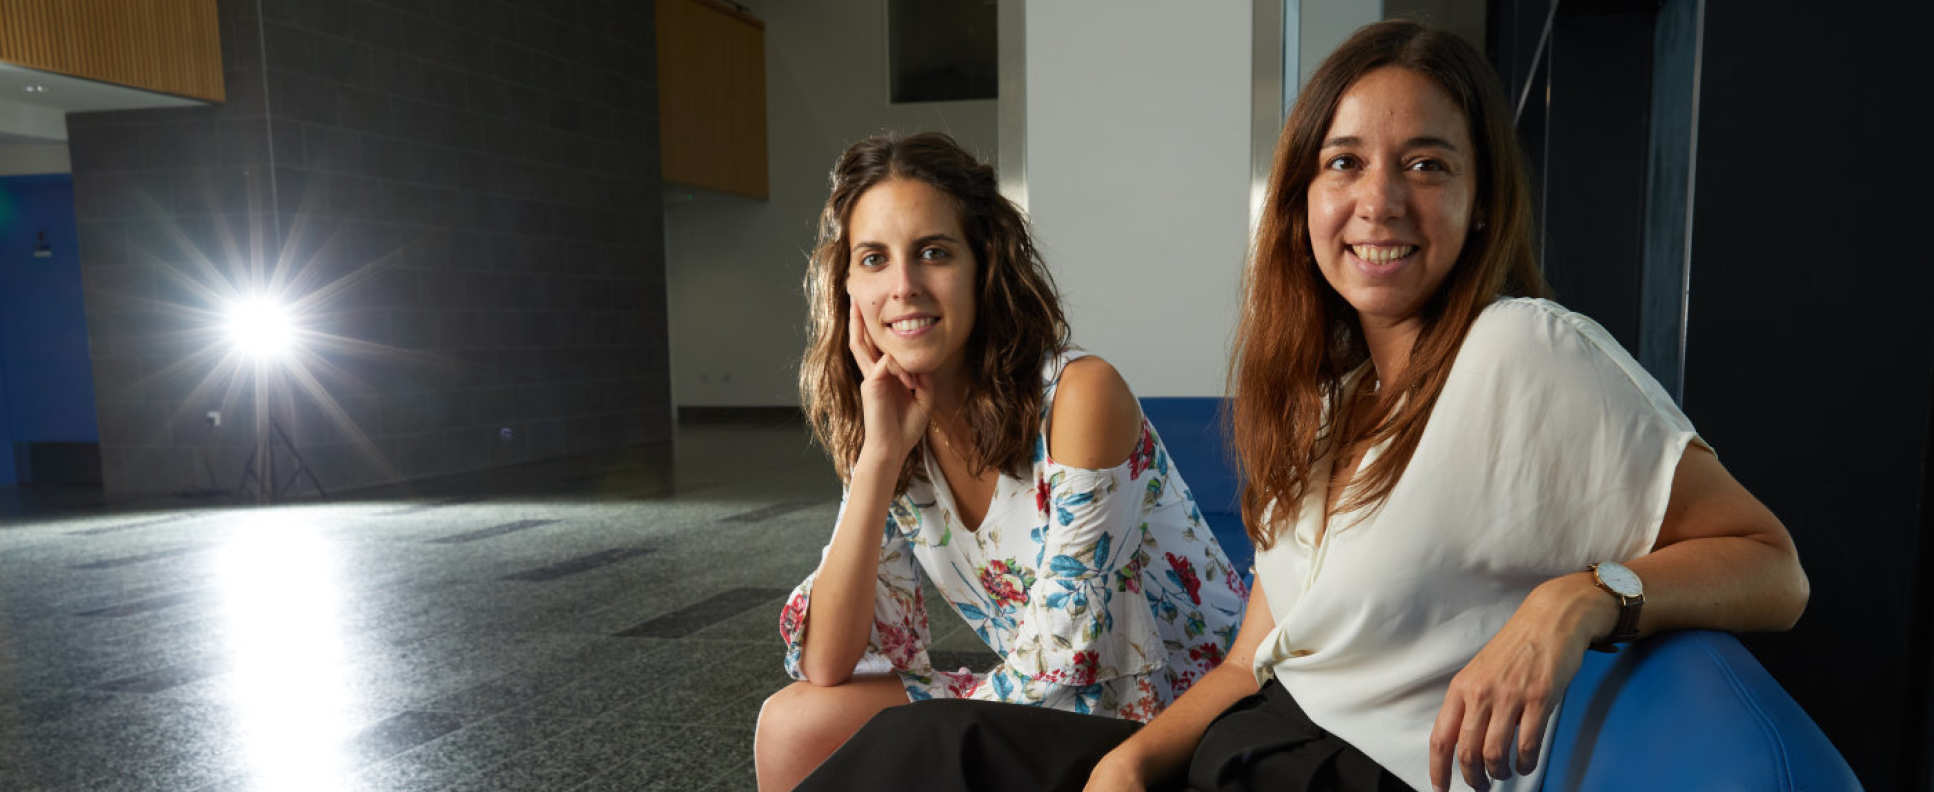 Drs Andrea Rodriguez Martinez and Ana Luisa Neves, founders of Momoby